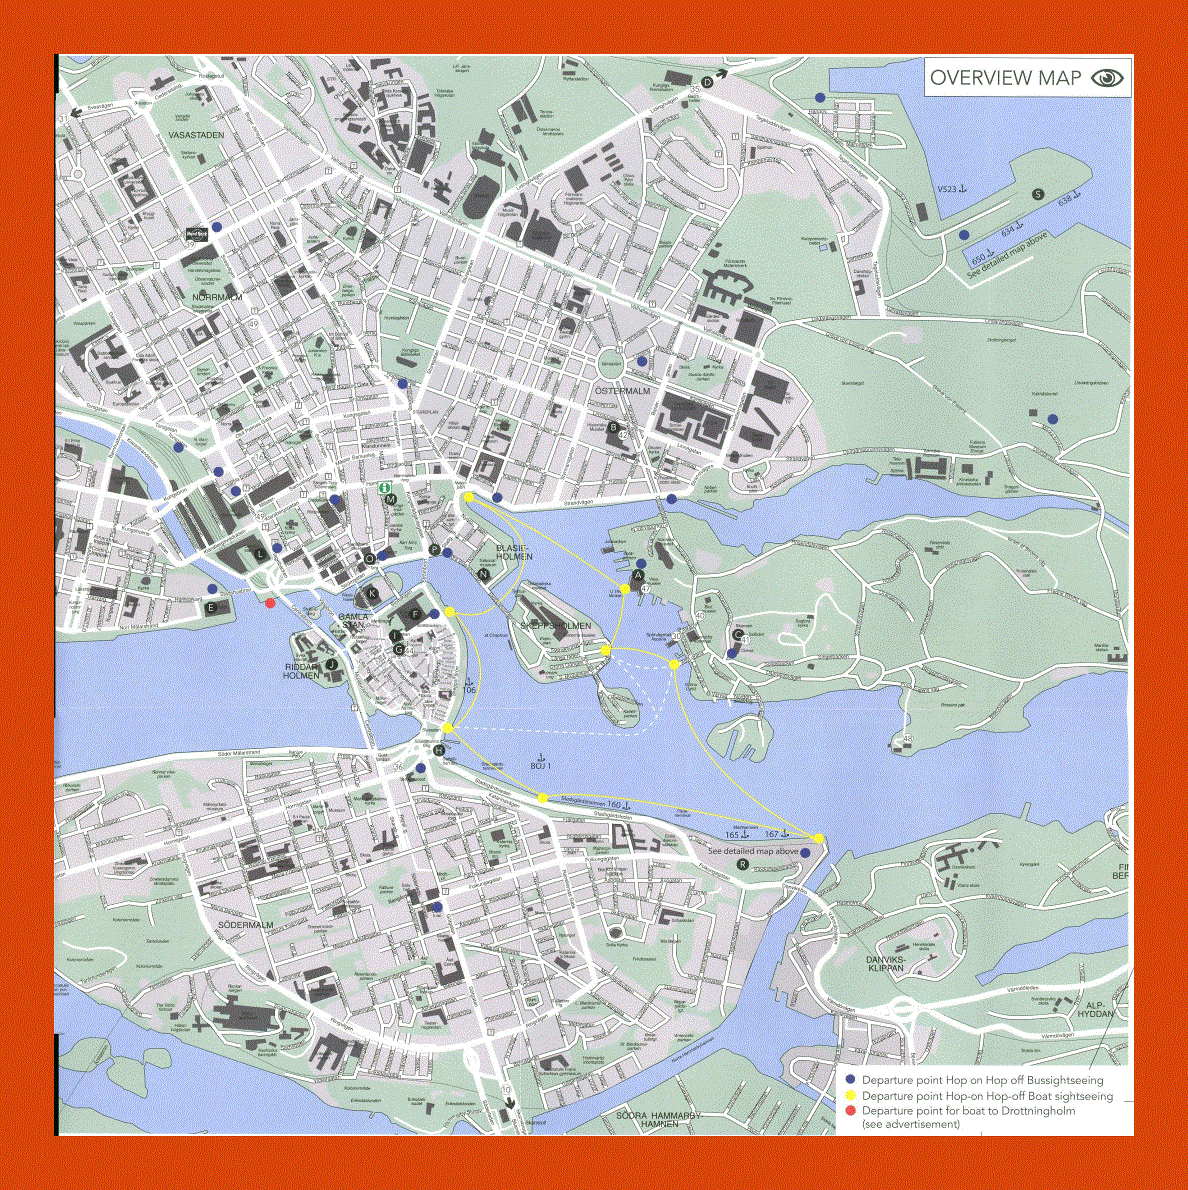 Road and tourist map of Stockholm city center